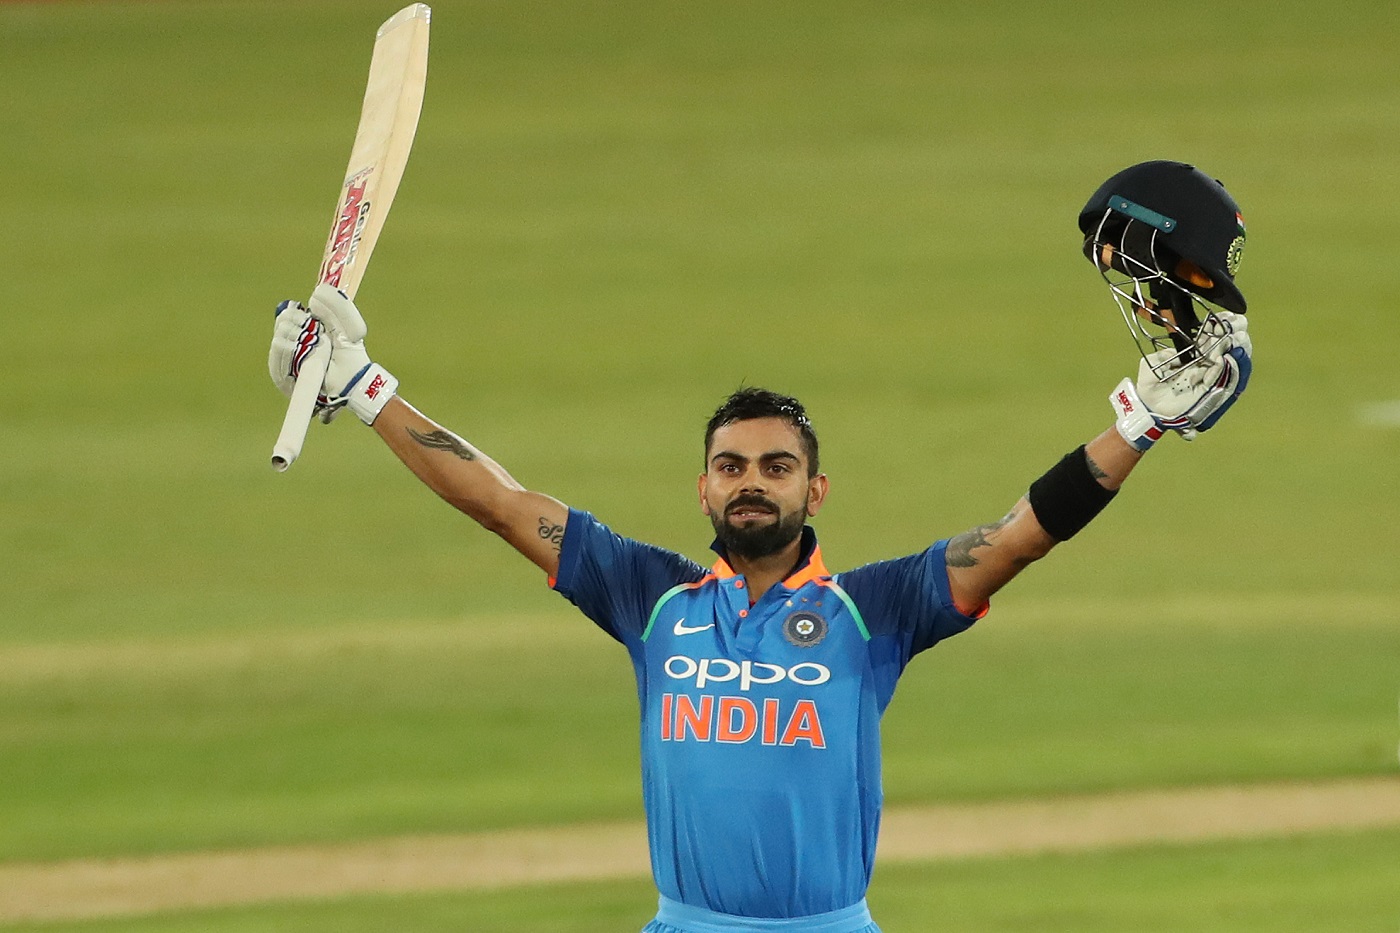 India beat South Africa India won by 8 wickets (with 107 balls remaining) - South Africa vs India, South Africa v India 2018, 6th ODI Match Summary, Report | ESPNcricinfo.com